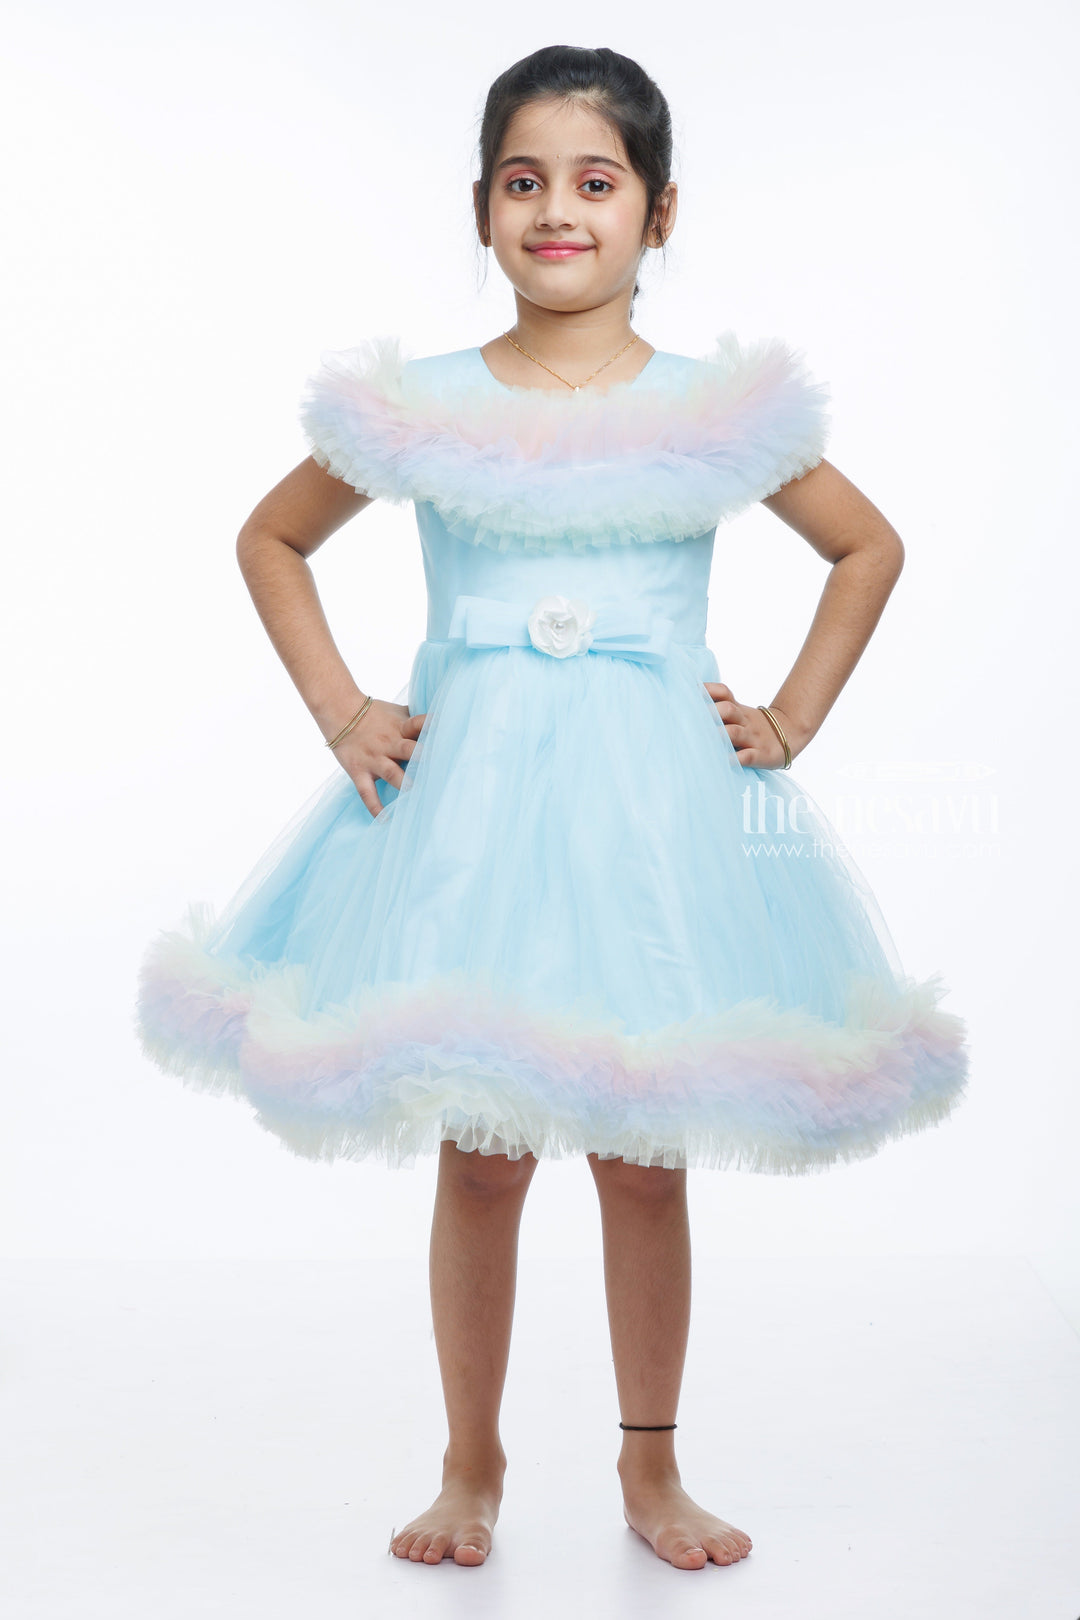 The Nesavu Girls Tutu Frock Rainbow Tulle Princess Party Frock: A Whirl of Color for Your Little Girl Nesavu 16 (1Y) / Blue / Plain Net PF182B-16 Shop Luxury Gradient Tulle Party Dress for Girls | Personalized Birthday Princess Frock | The Nesavu